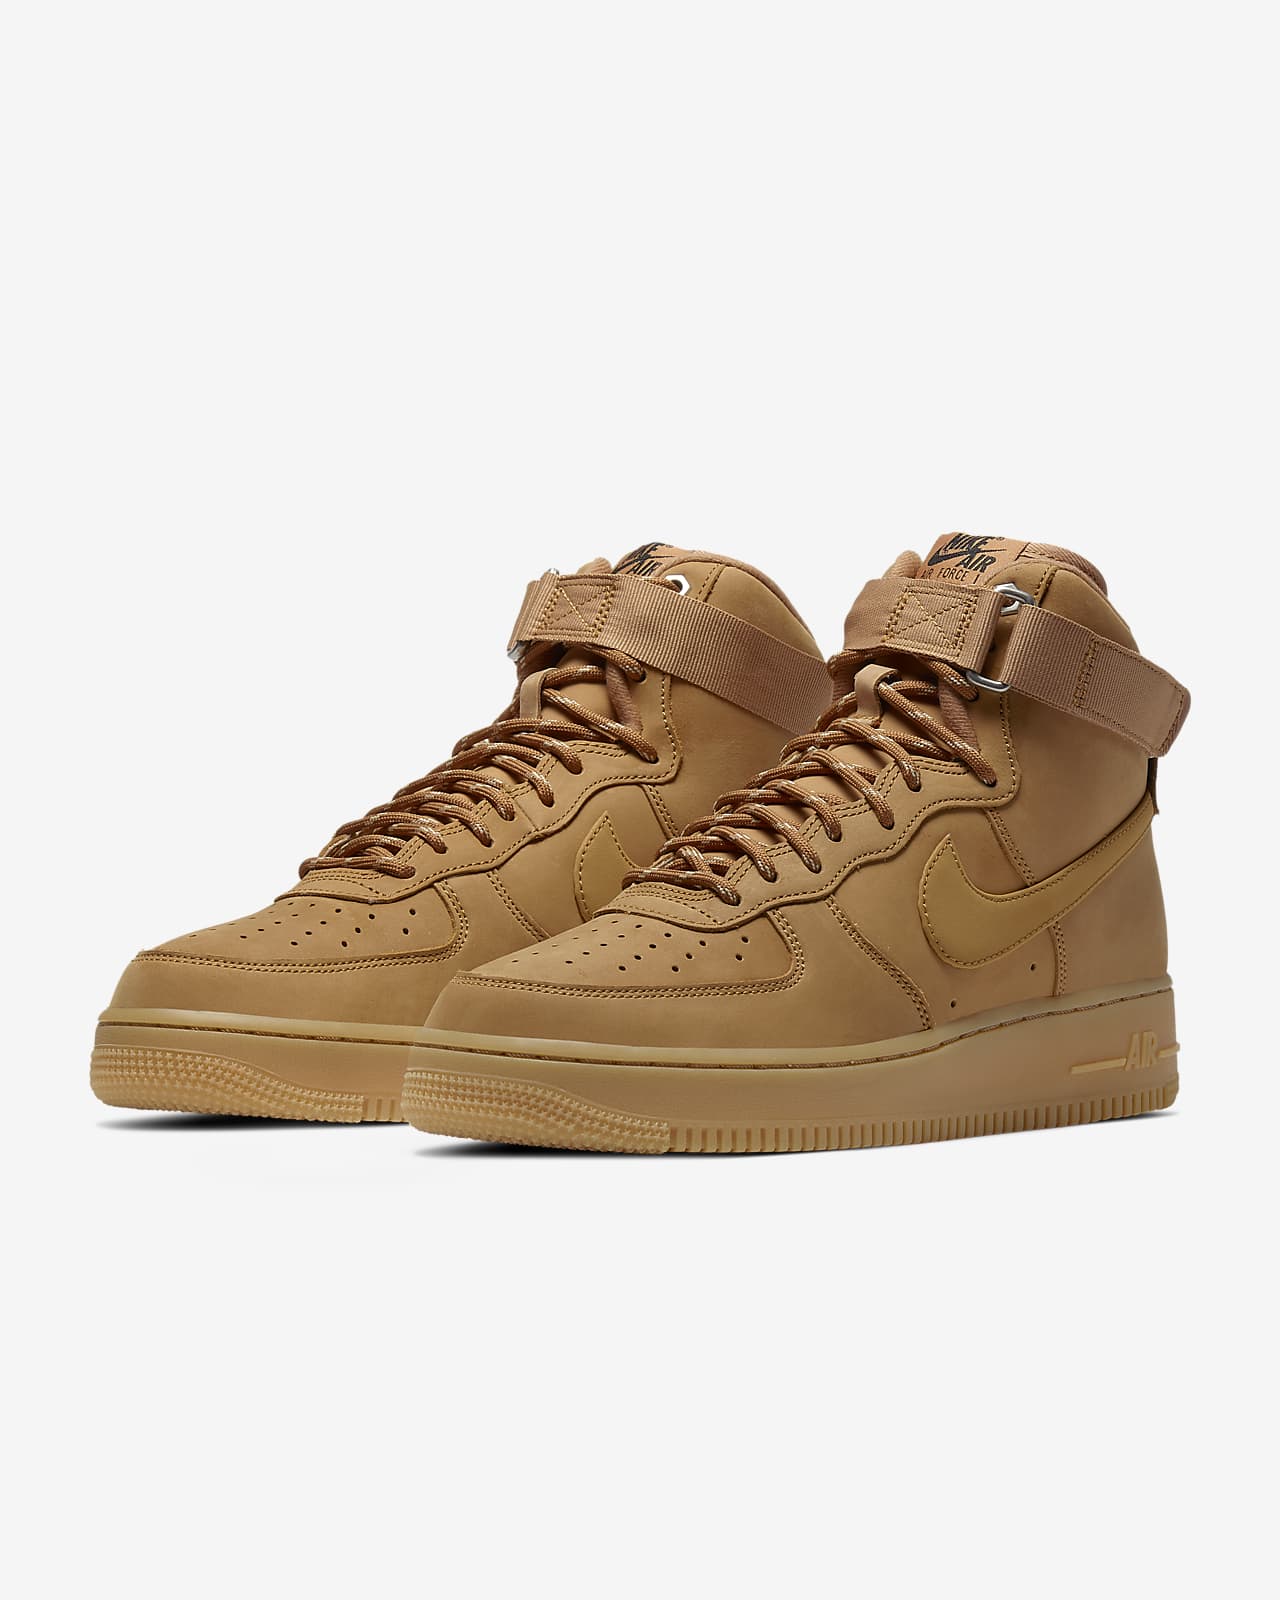 nike air force 1 high brown leather